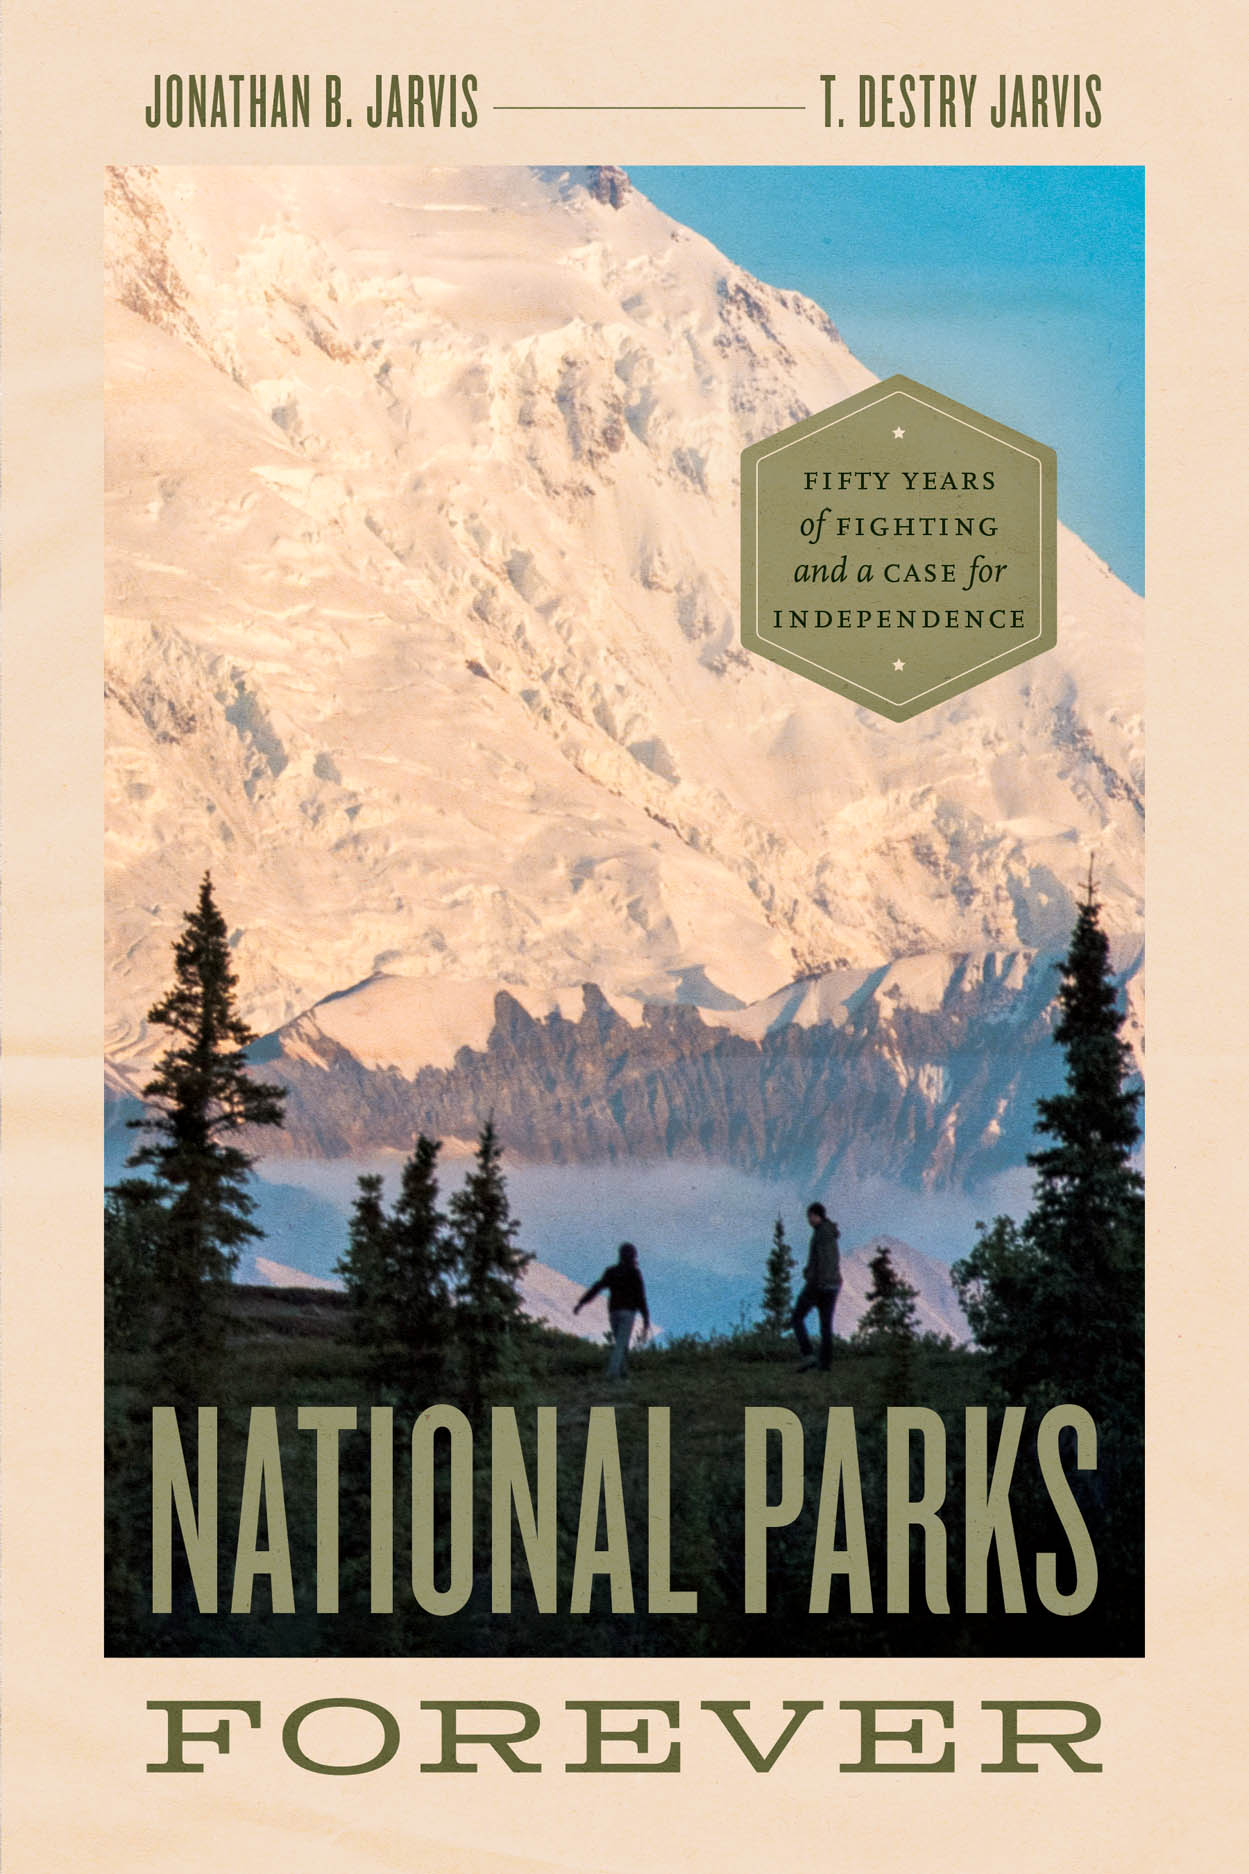 A cover for Jonathan and Destry Jarvis' book National Parks Forever: Fifty Years of Fighting and a Case for Independence